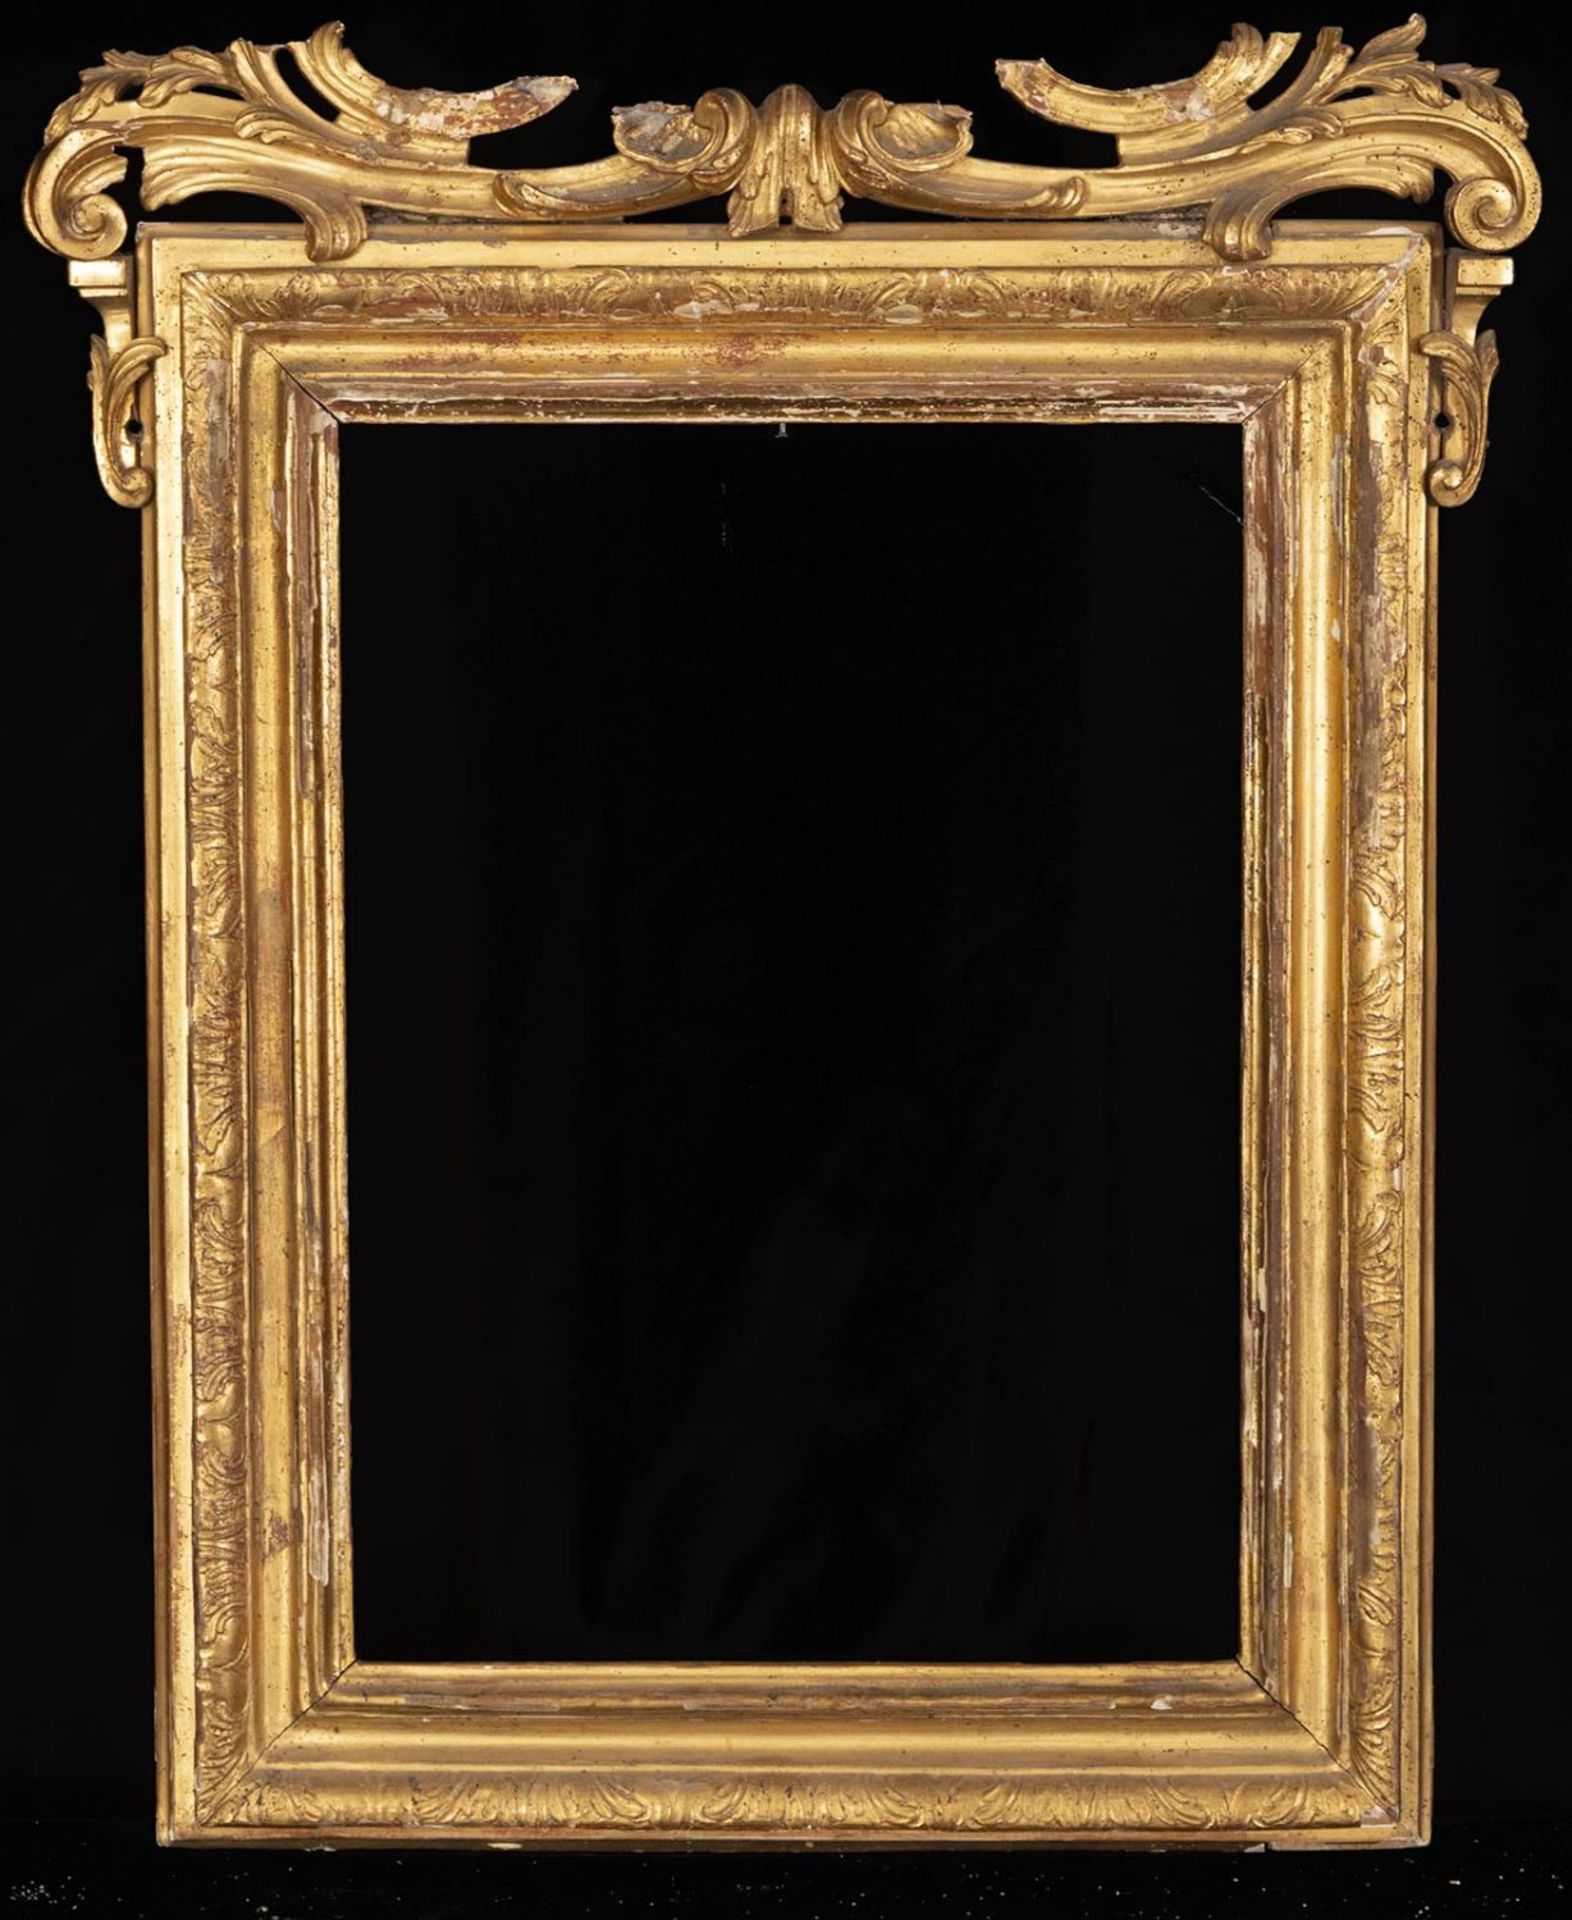 Spanish frame with a crest from the 18th century, in wood gilded with gold leaf